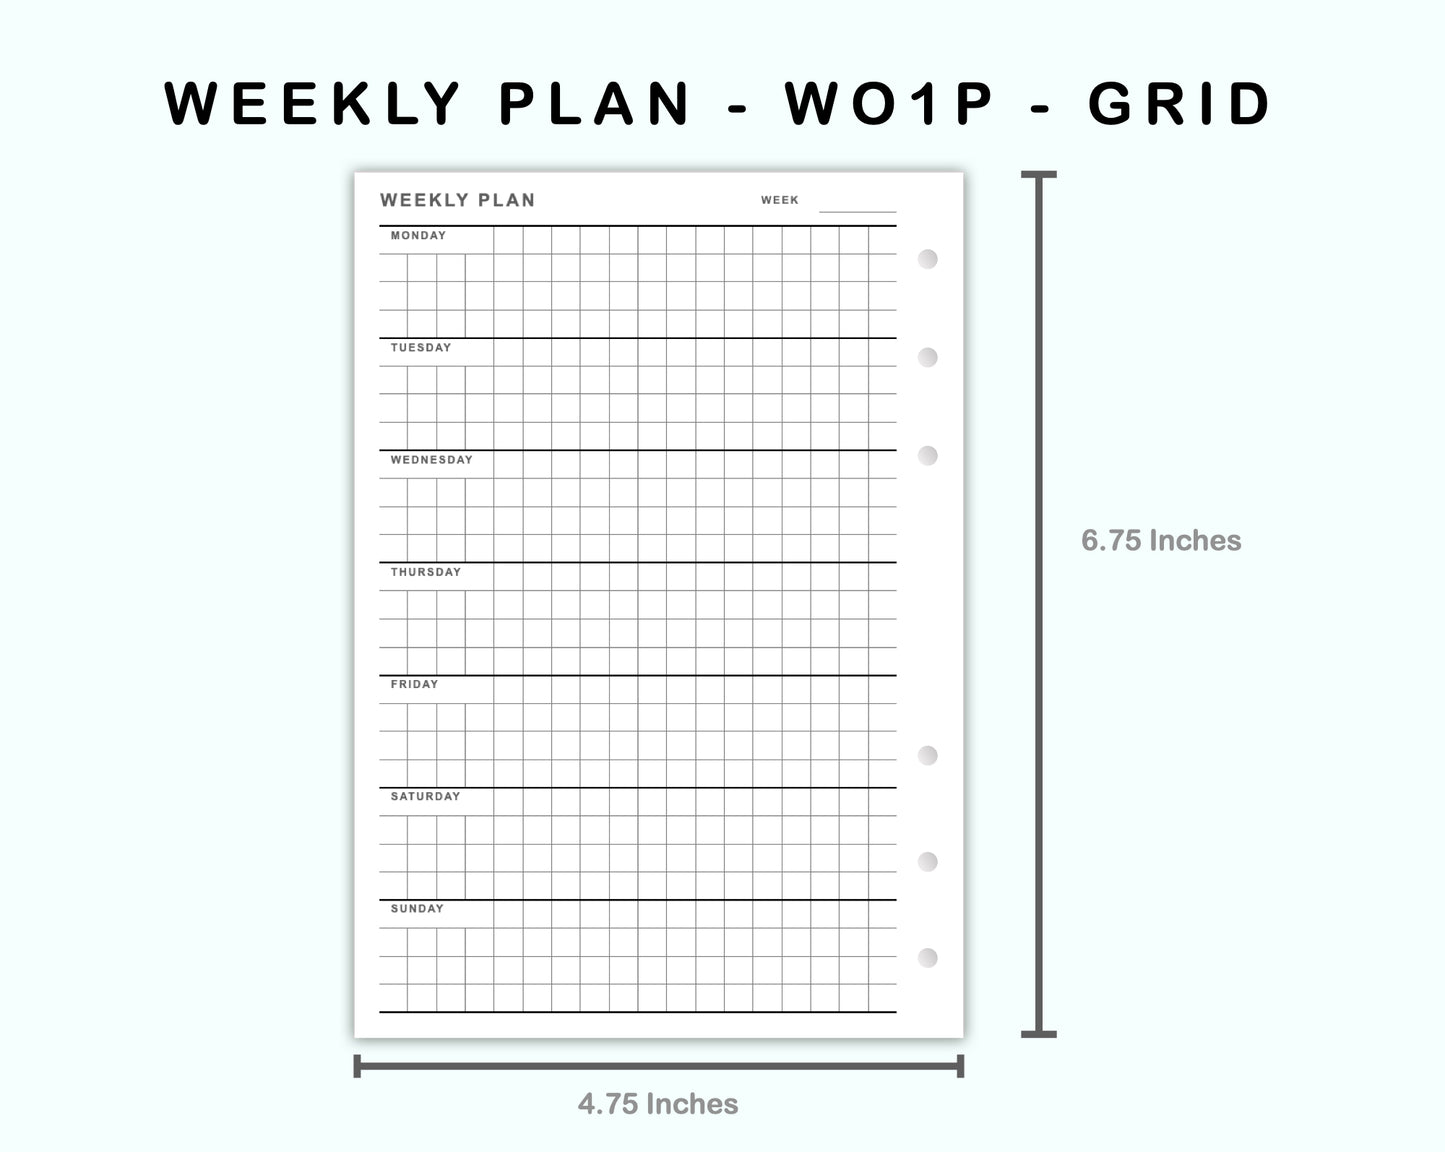 Personal Wide Inserts - Weekly Plan - WO1P - Grid